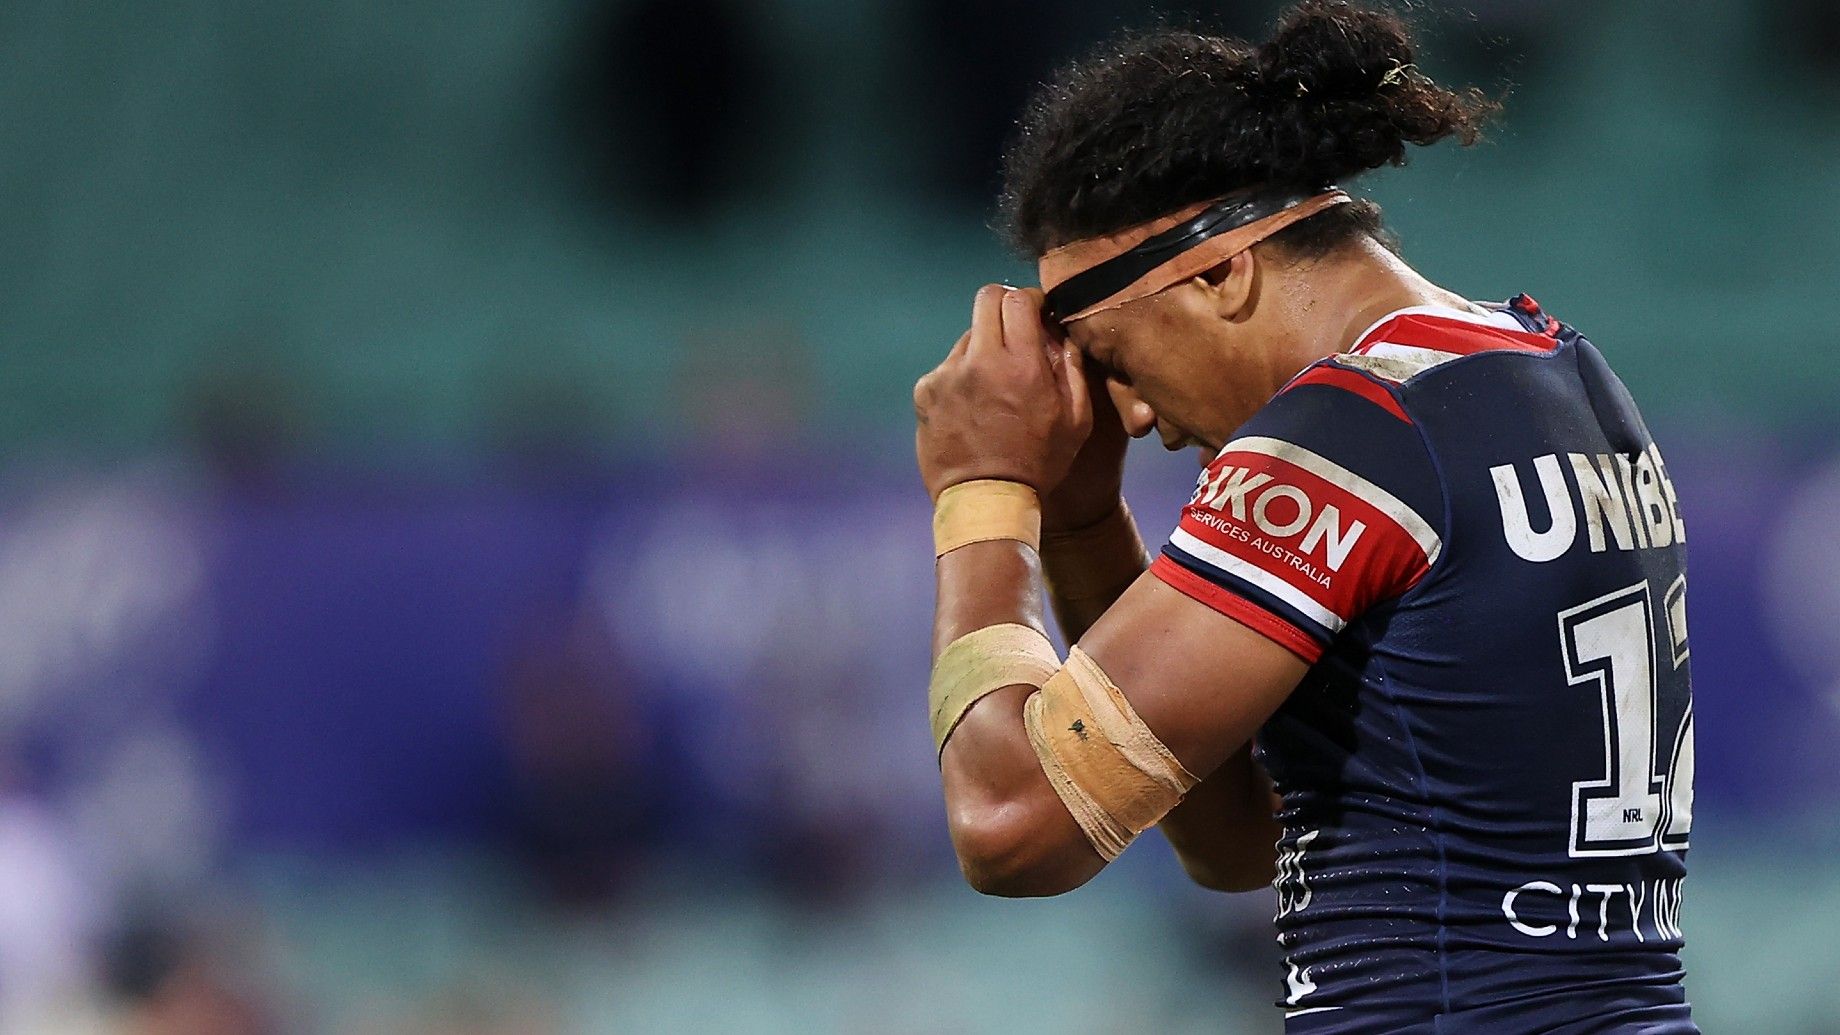 Storm win spiteful encounter against Roosters after incredible bombed try in final minutes